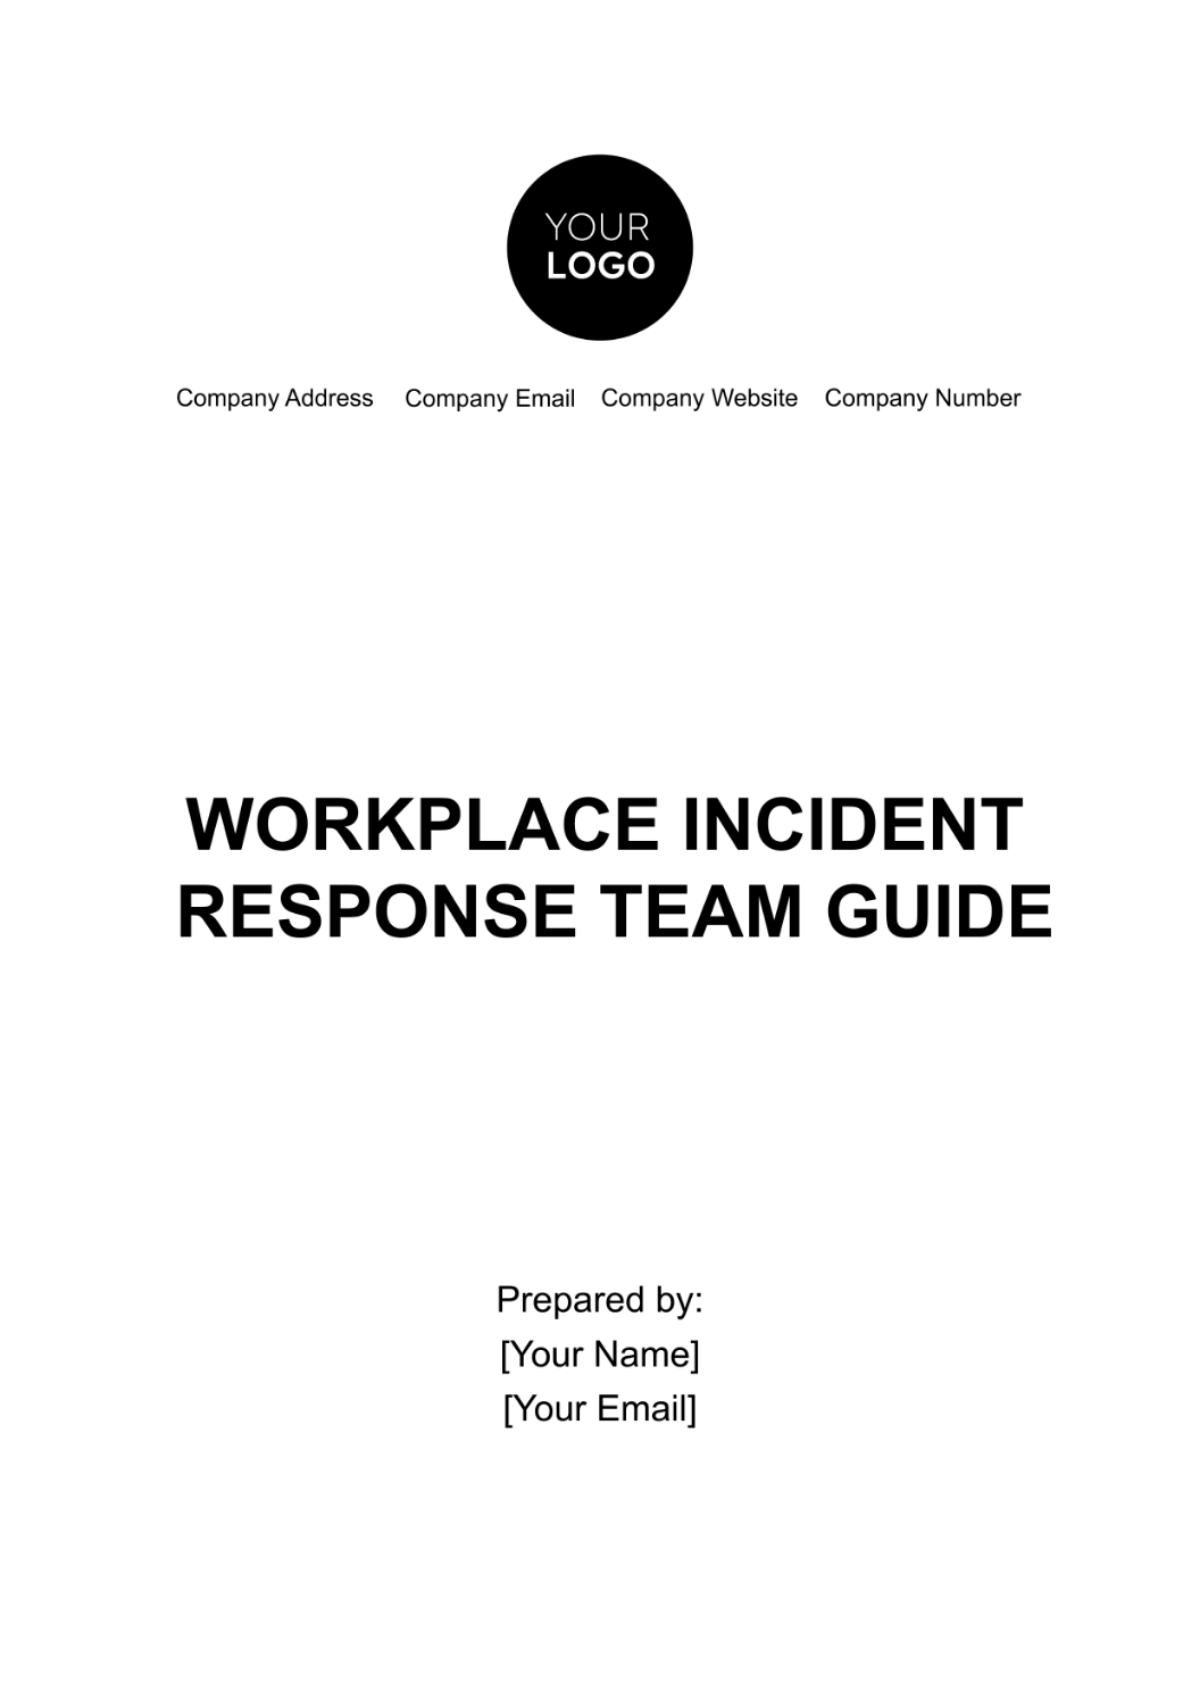 Workplace Incident Response Team Guide Template